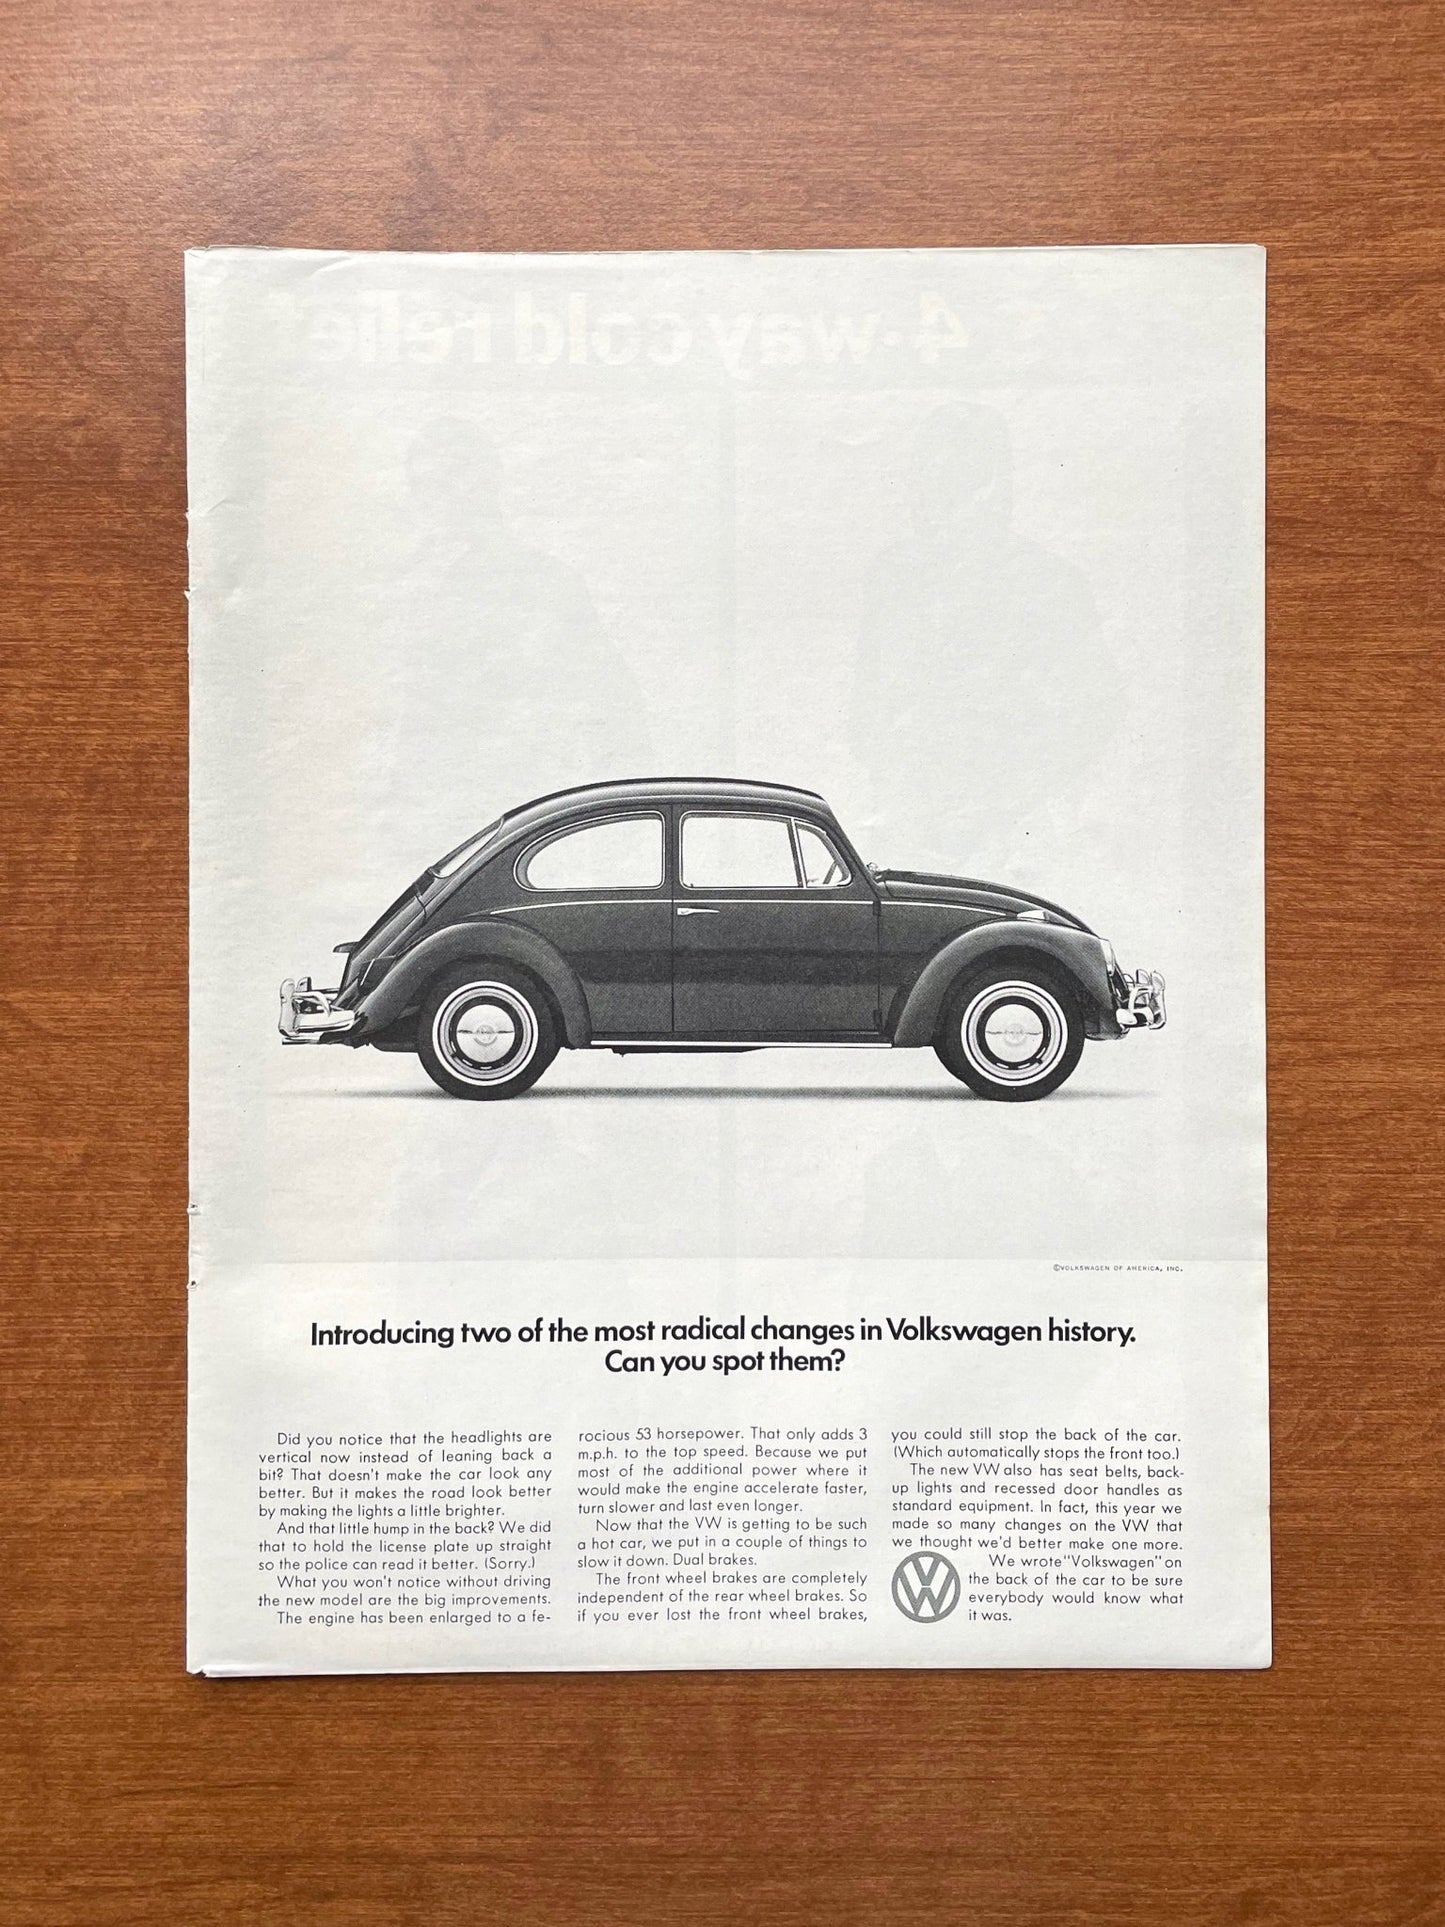 1966 Volkswagen VW Beetle "two most radical changes...spot them?" Advertisement